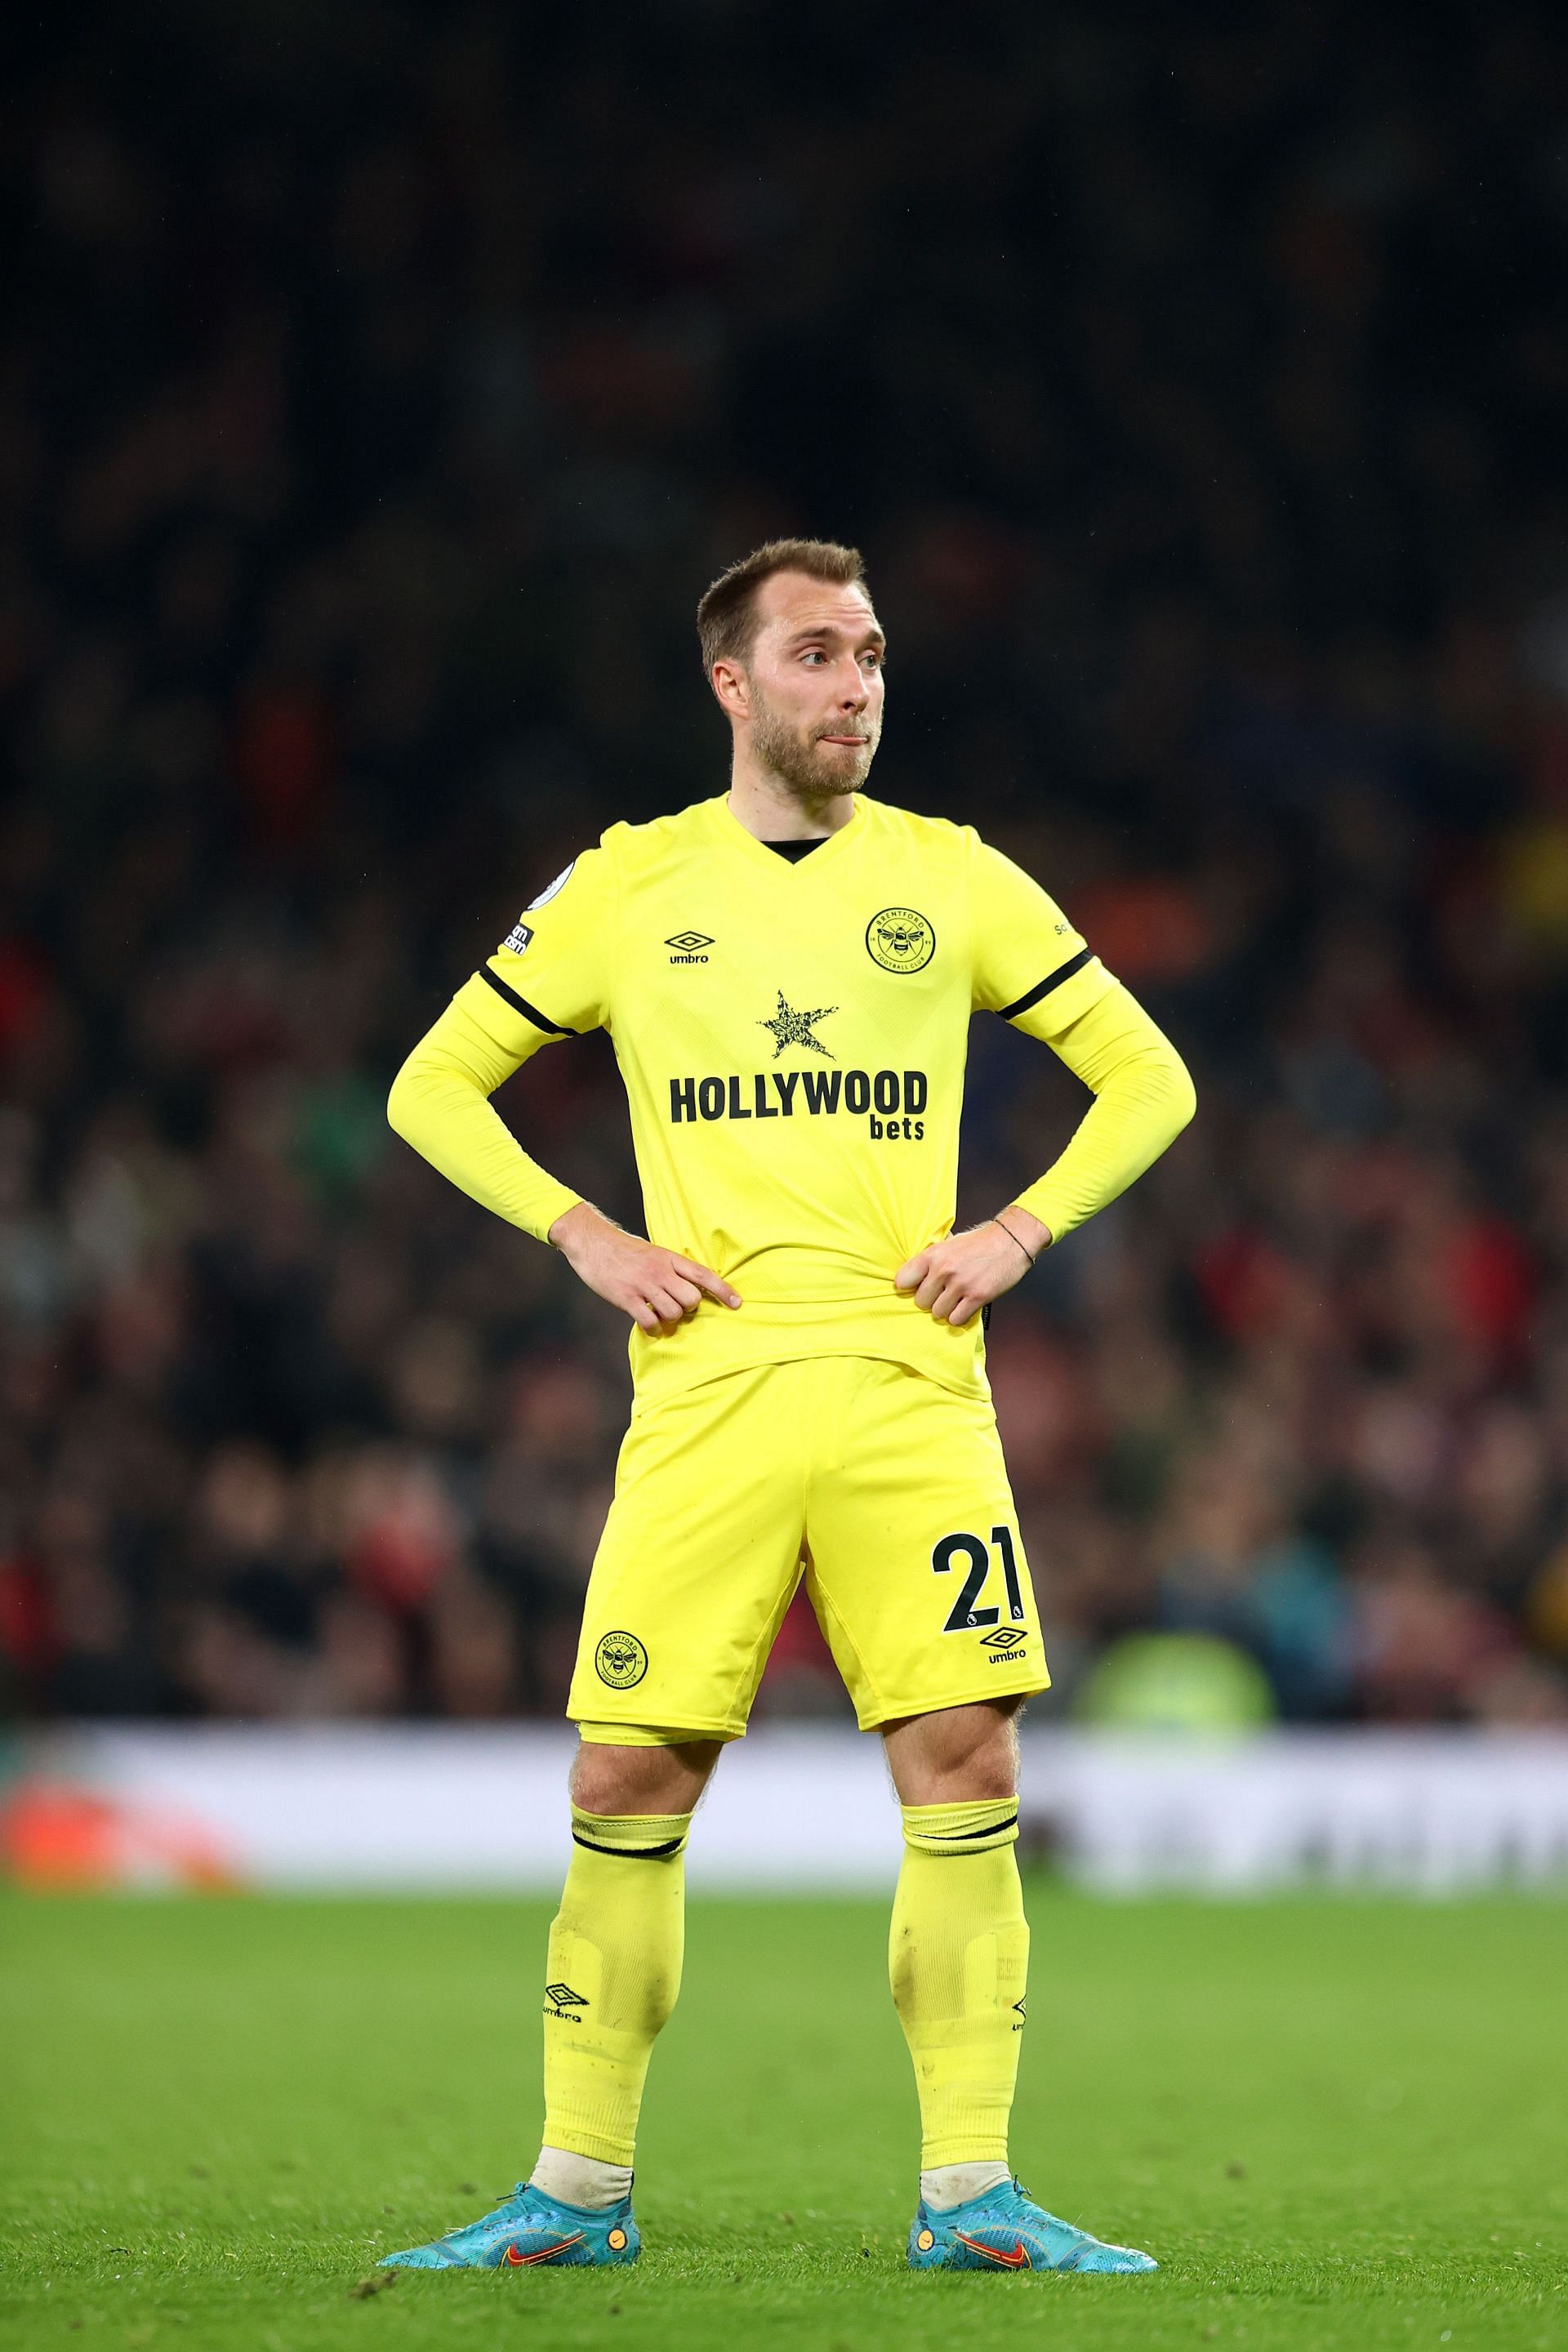 Christian Eriksen is a wanted man by many clubs